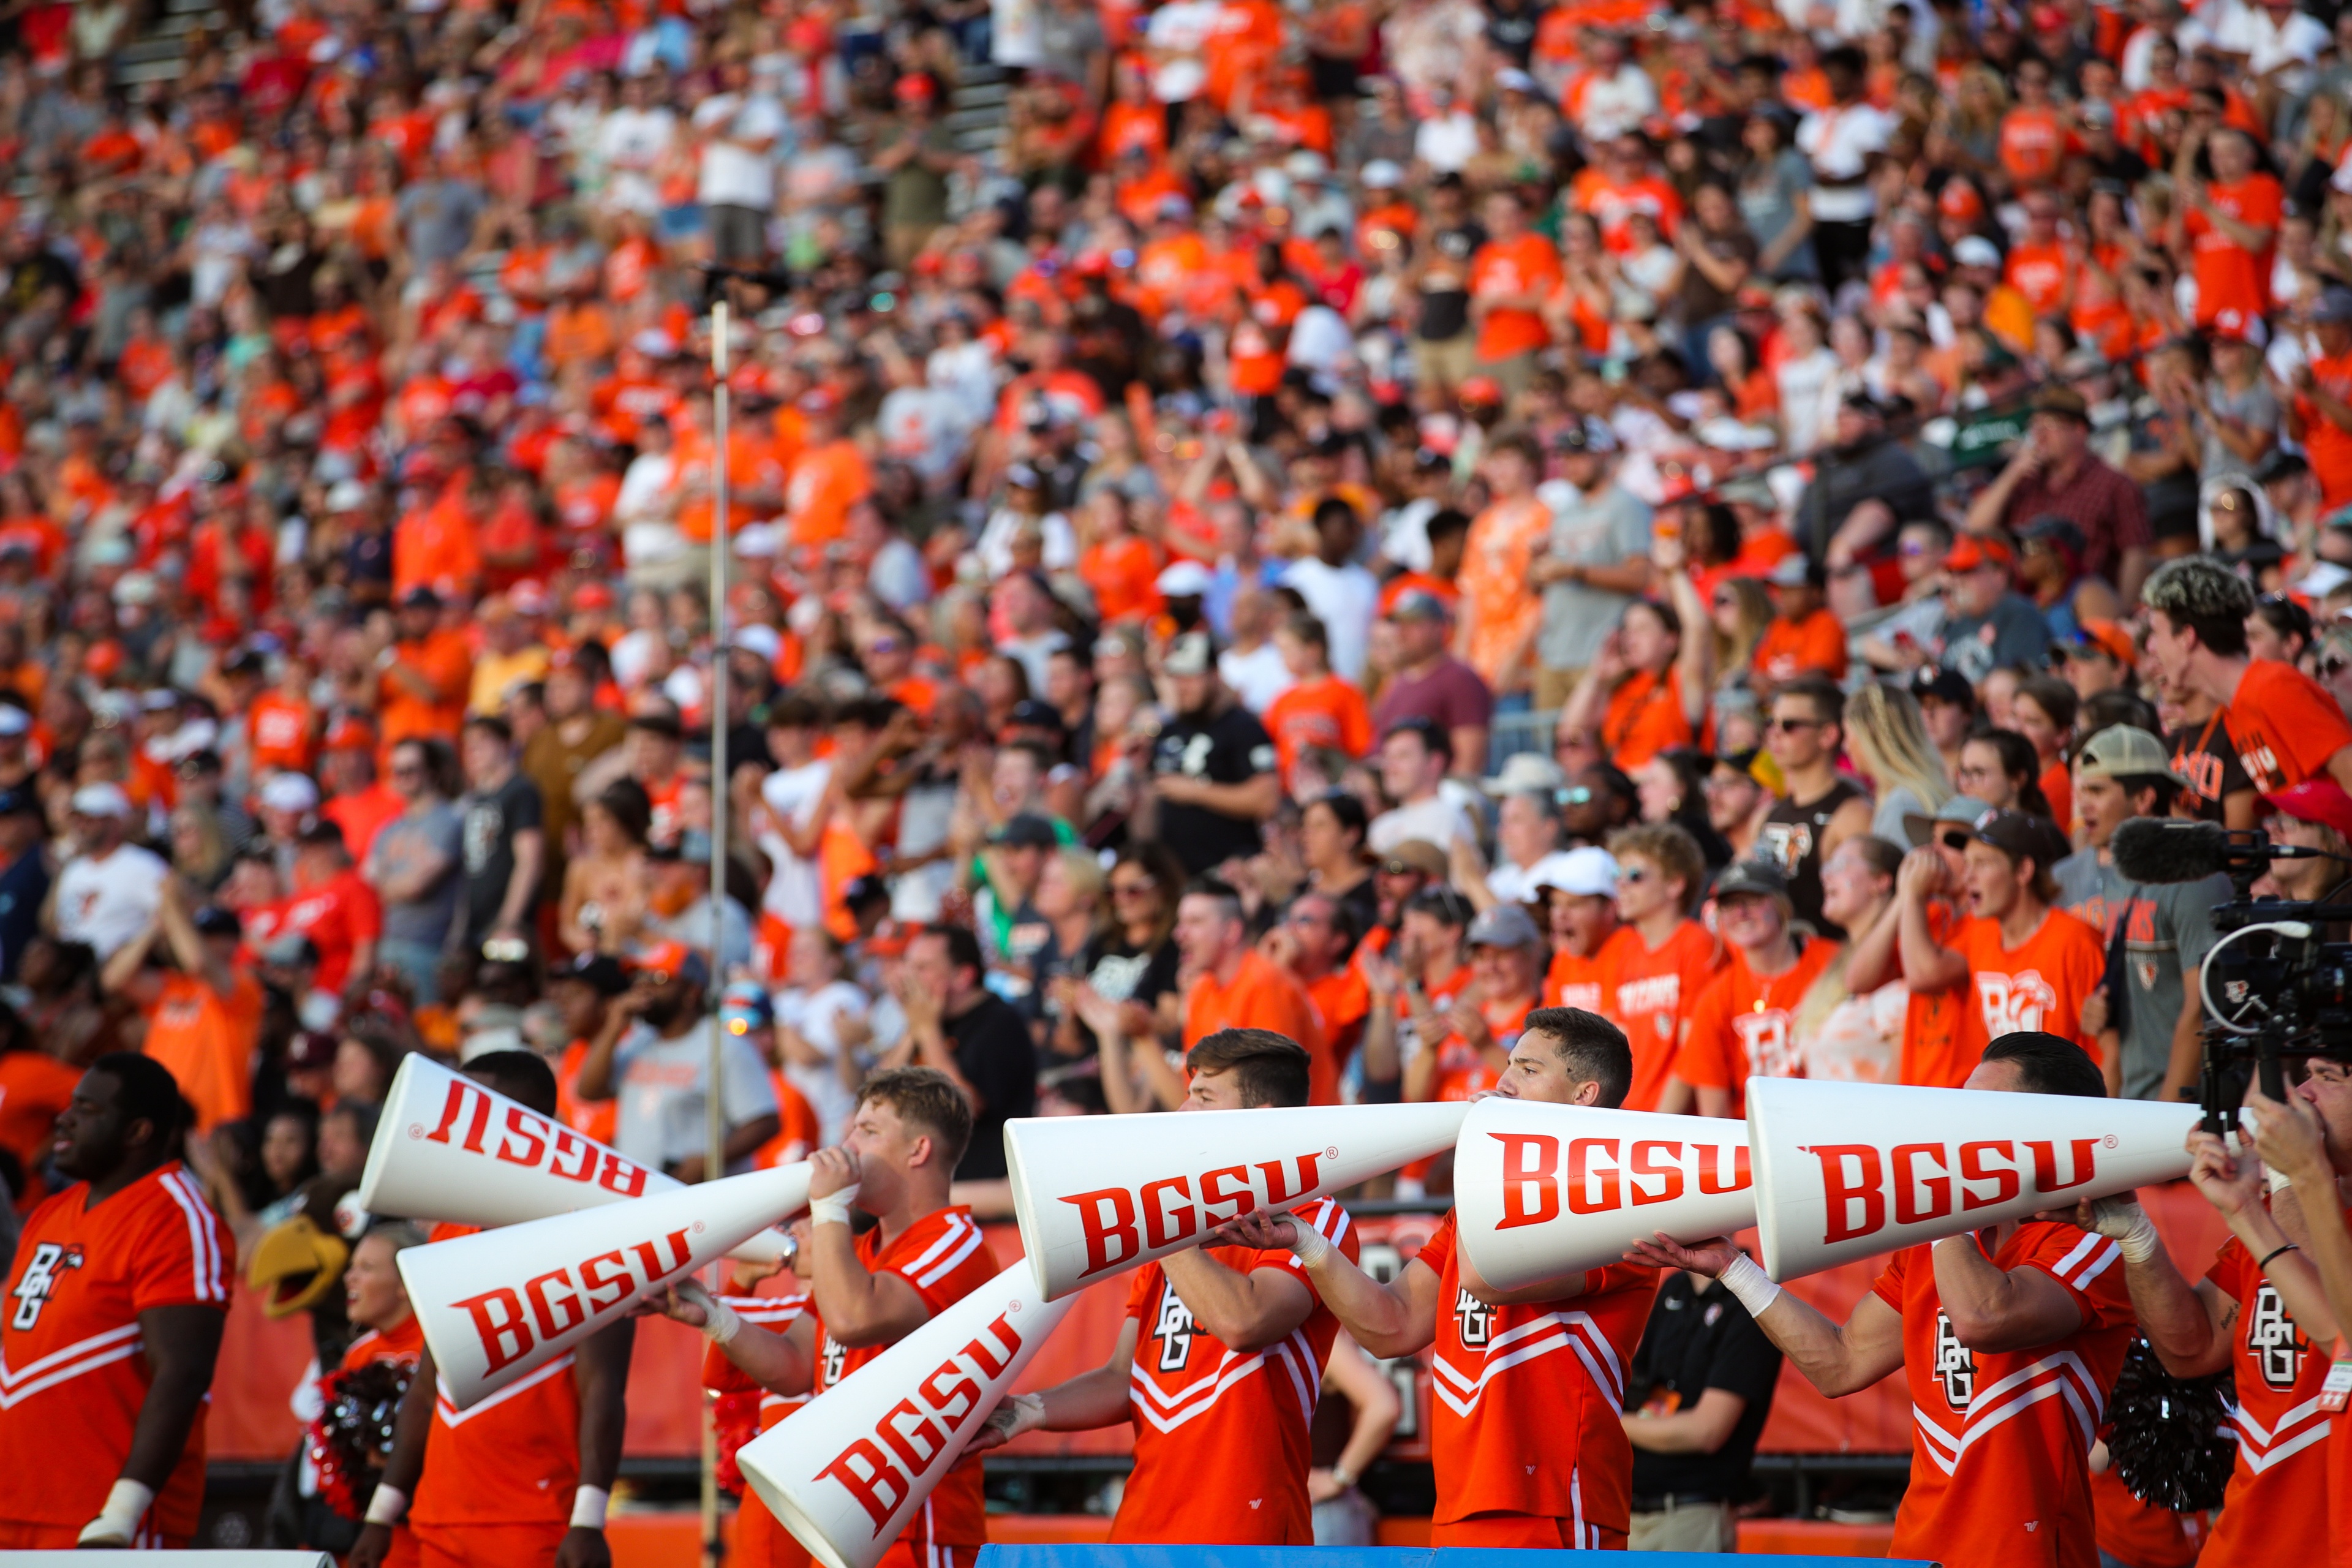 BGSU cheer team leads fans at the homecoming football game